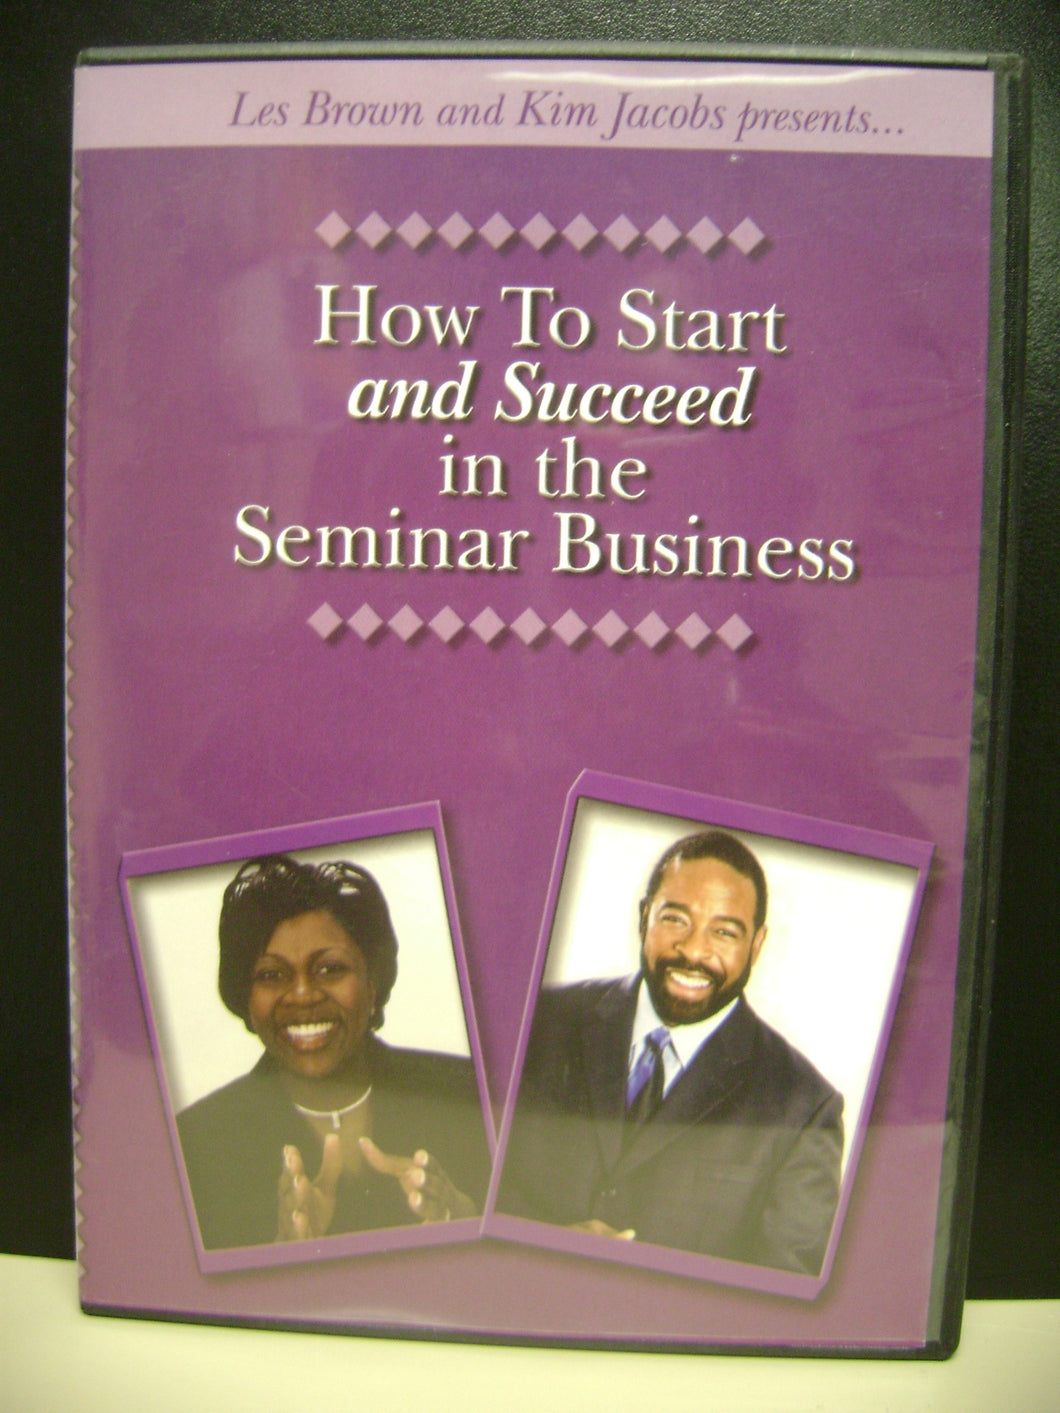 How to Start and Succeed in Seminar Business CD and Workbook (DIGITAL COURSE)